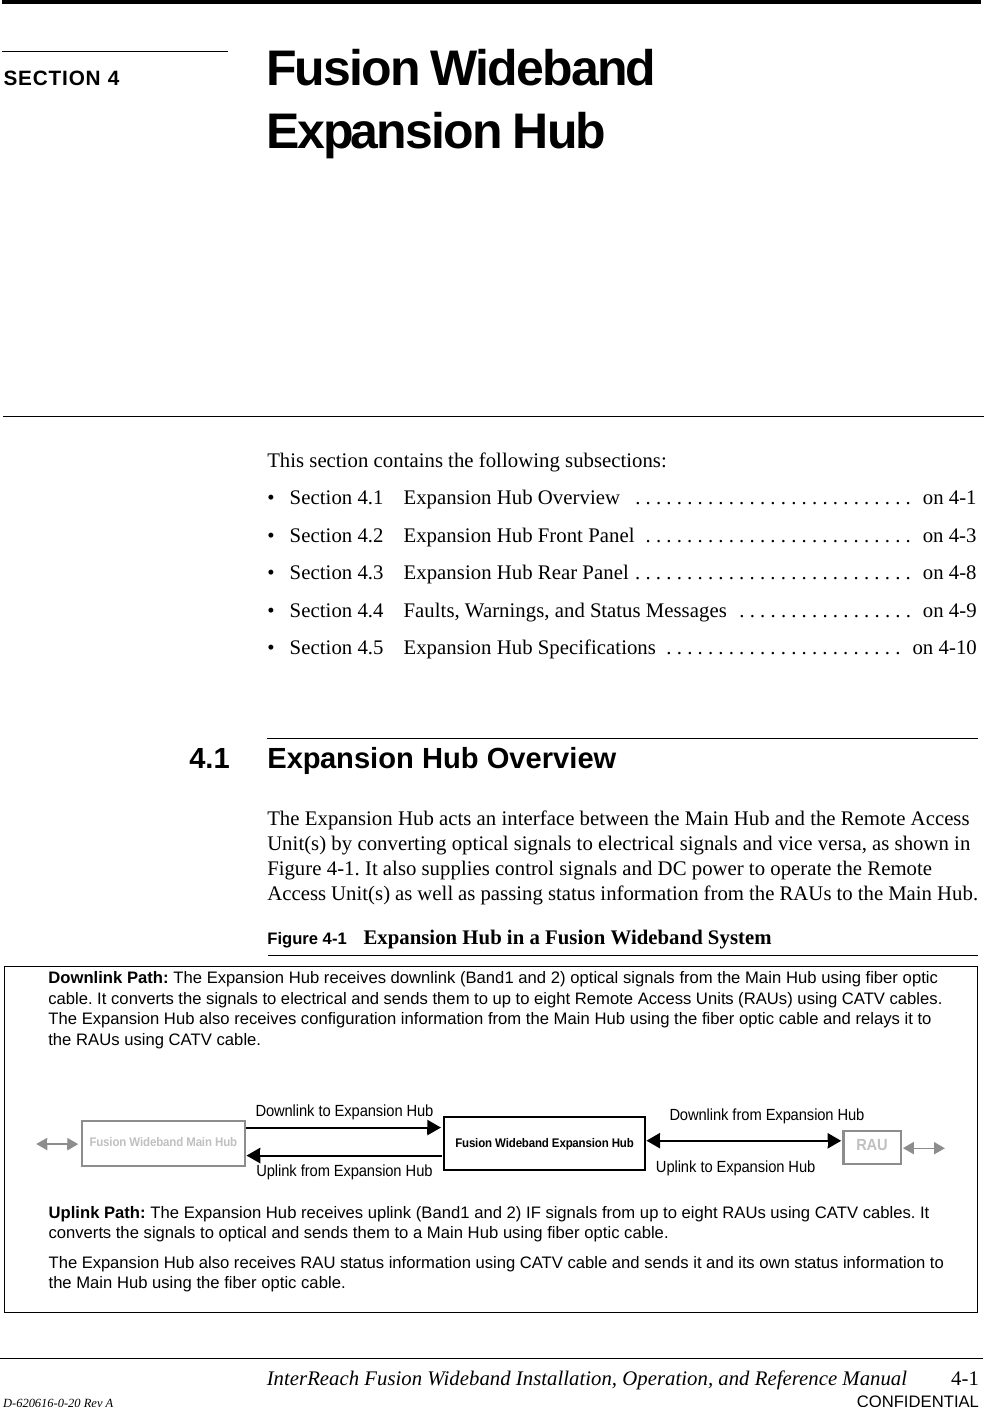 InterReach Fusion Wideband Installation, Operation, and Reference Manual 4-1D-620616-0-20 Rev A CONFIDENTIALSECTION 4 Fusion Wideband Expansion HubThis section contains the following subsections:• Section 4.1   Expansion Hub Overview   . . . . . . . . . . . . . . . . . . . . . . . . . . .  on 4-1• Section 4.2   Expansion Hub Front Panel  . . . . . . . . . . . . . . . . . . . . . . . . . .  on 4-3• Section 4.3   Expansion Hub Rear Panel . . . . . . . . . . . . . . . . . . . . . . . . . . .  on 4-8• Section 4.4   Faults, Warnings, and Status Messages  . . . . . . . . . . . . . . . . .  on 4-9• Section 4.5   Expansion Hub Specifications  . . . . . . . . . . . . . . . . . . . . . . .  on 4-104.1 Expansion Hub OverviewThe Expansion Hub acts an interface between the Main Hub and the Remote Access Unit(s) by converting optical signals to electrical signals and vice versa, as shown in Figure 4-1. It also supplies control signals and DC power to operate the Remote Access Unit(s) as well as passing status information from the RAUs to the Main Hub.Figure 4-1 Expansion Hub in a Fusion Wideband SystemFusion Wideband Expansion HubFusion Wideband Main HubRAUDownlink Path: The Expansion Hub receives downlink (Band1 and 2) optical signals from the Main Hub using fiber optic cable. It converts the signals to electrical and sends them to up to eight Remote Access Units (RAUs) using CATV cables. The Expansion Hub also receives configuration information from the Main Hub using the fiber optic cable and relays it to the RAUs using CATV cable.Uplink Path: The Expansion Hub receives uplink (Band1 and 2) IF signals from up to eight RAUs using CATV cables. It converts the signals to optical and sends them to a Main Hub using fiber optic cable.The Expansion Hub also receives RAU status information using CATV cable and sends it and its own status information to the Main Hub using the fiber optic cable.Downlink to Expansion HubUplink from Expansion HubDownlink from Expansion HubUplink to Expansion Hub